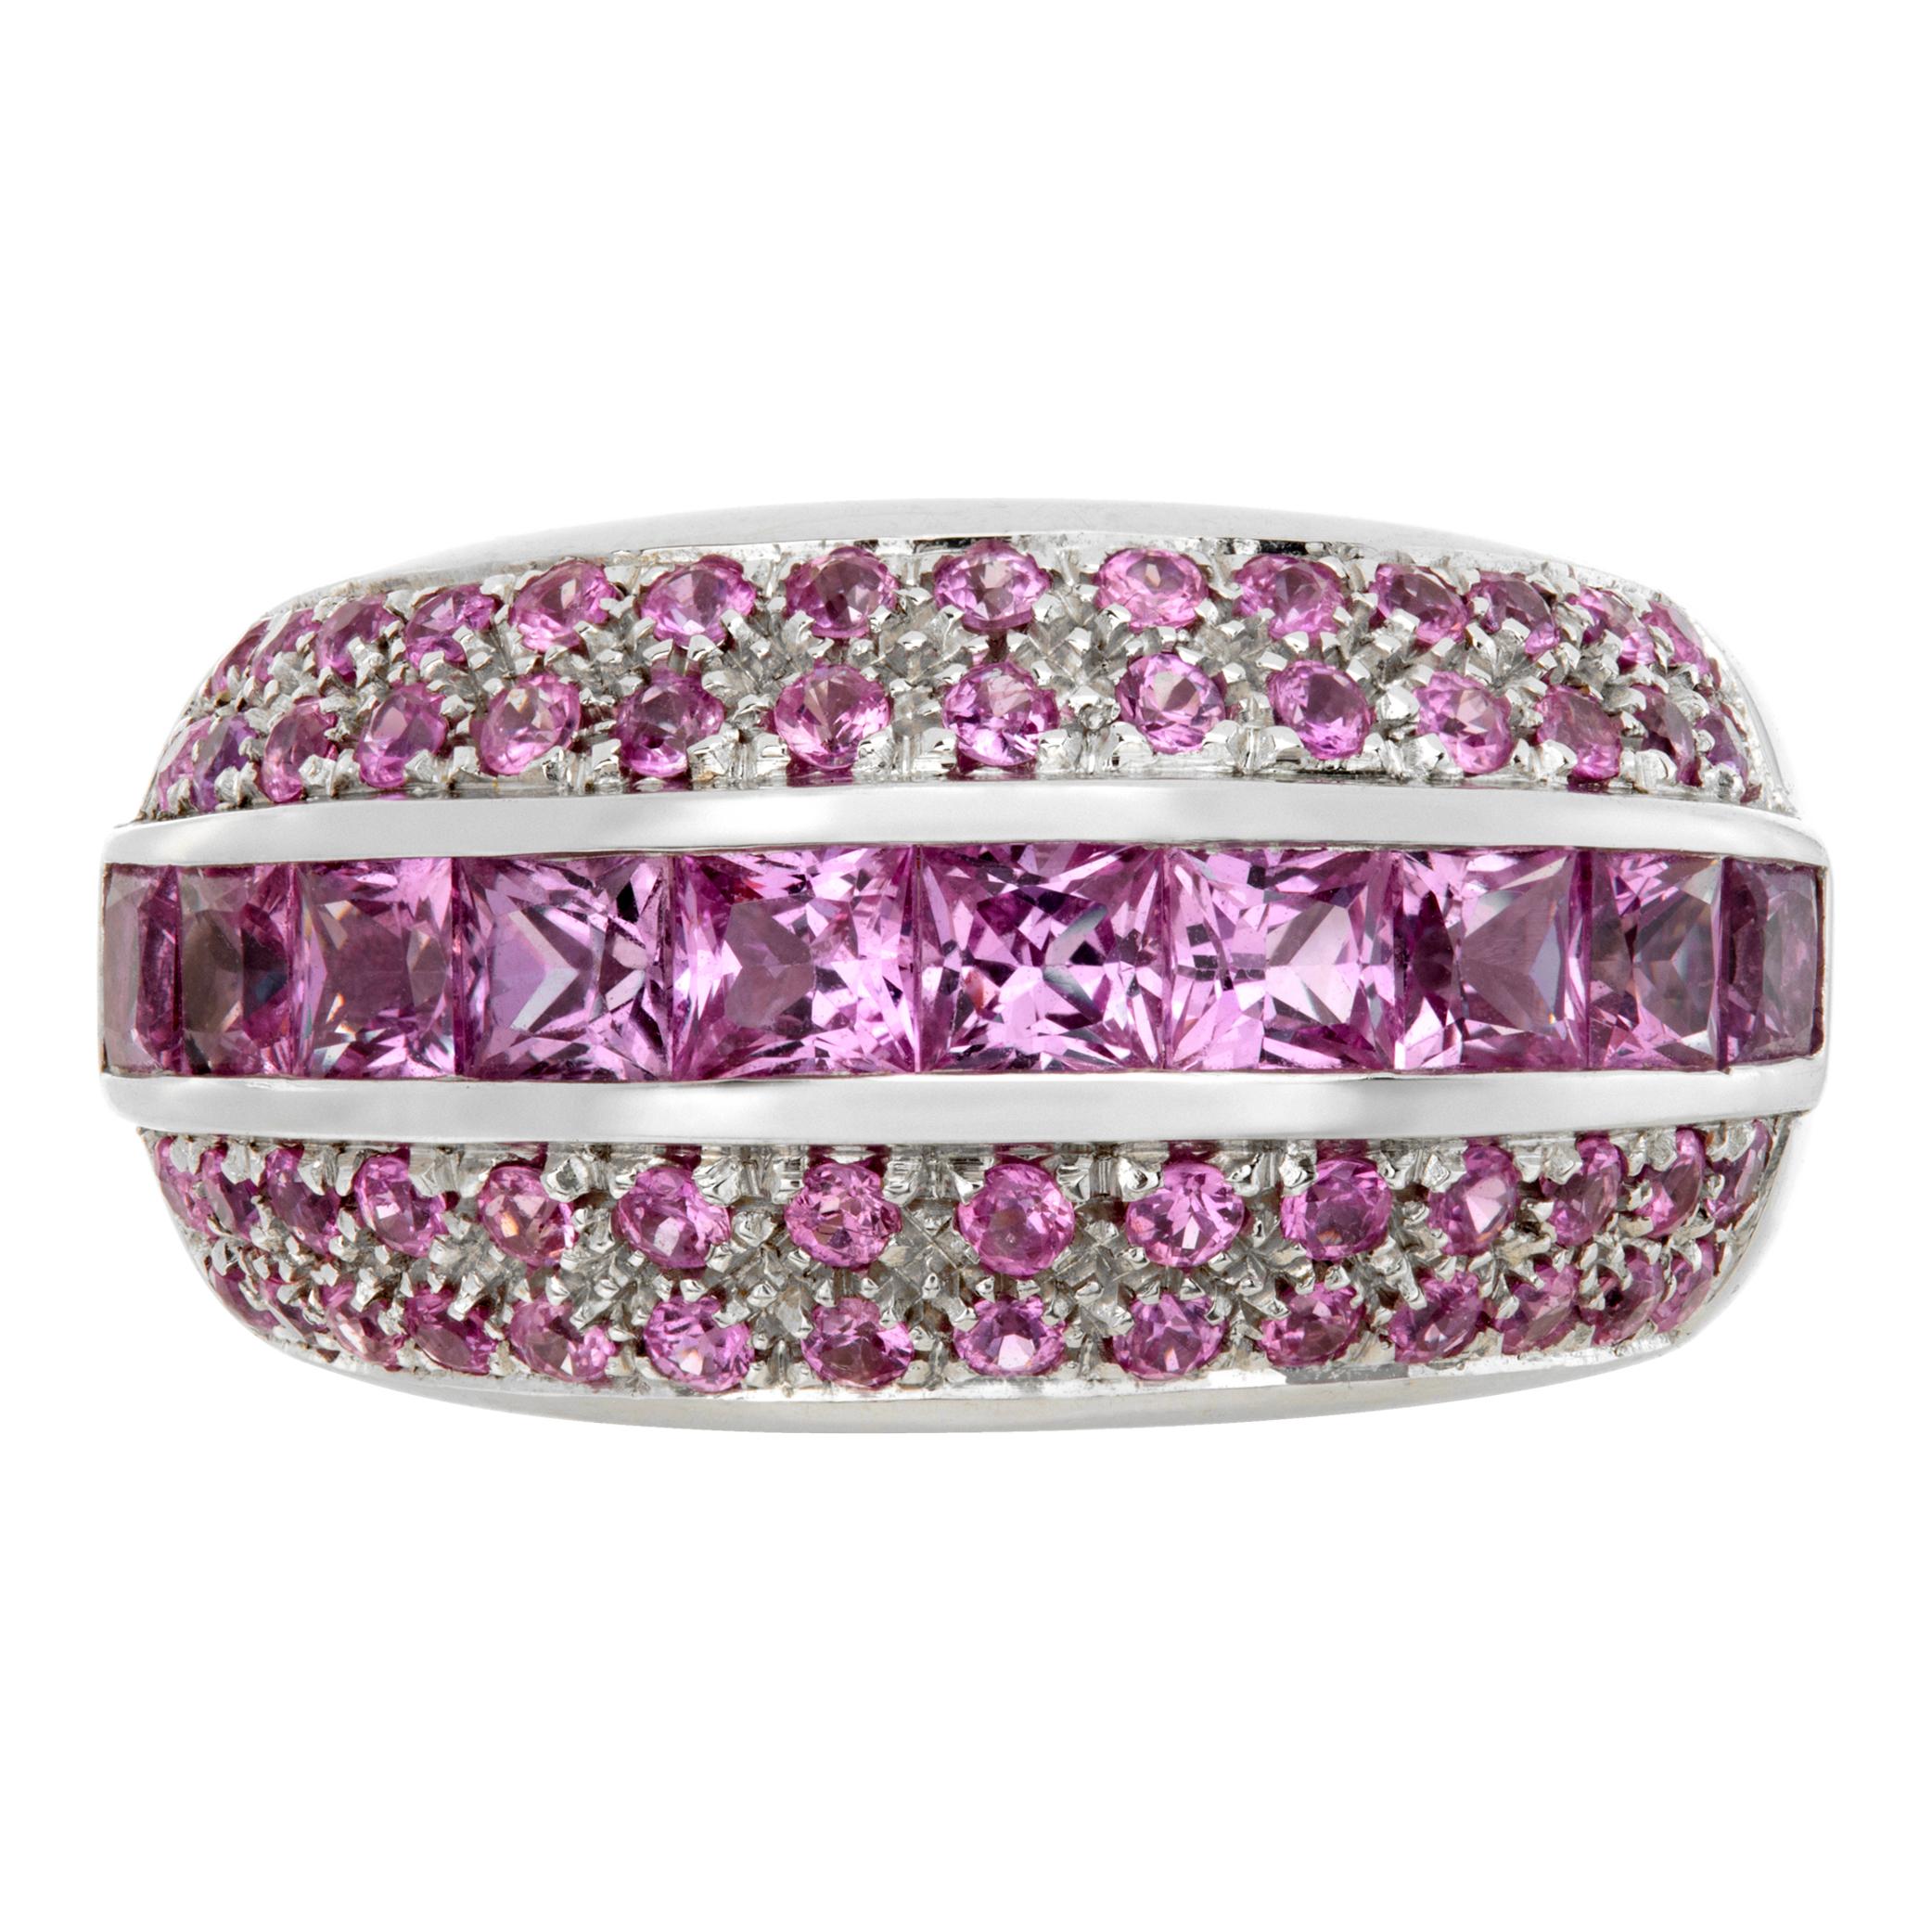 Pink sapphire ring in 18k white gold with approximately 3 carats in center channel set princess cuts and 4 rows of round prink sapphires. Ring size. 5.75

This Pink sapphire ring is currently size 5.75 and some items can be sized up or down, please